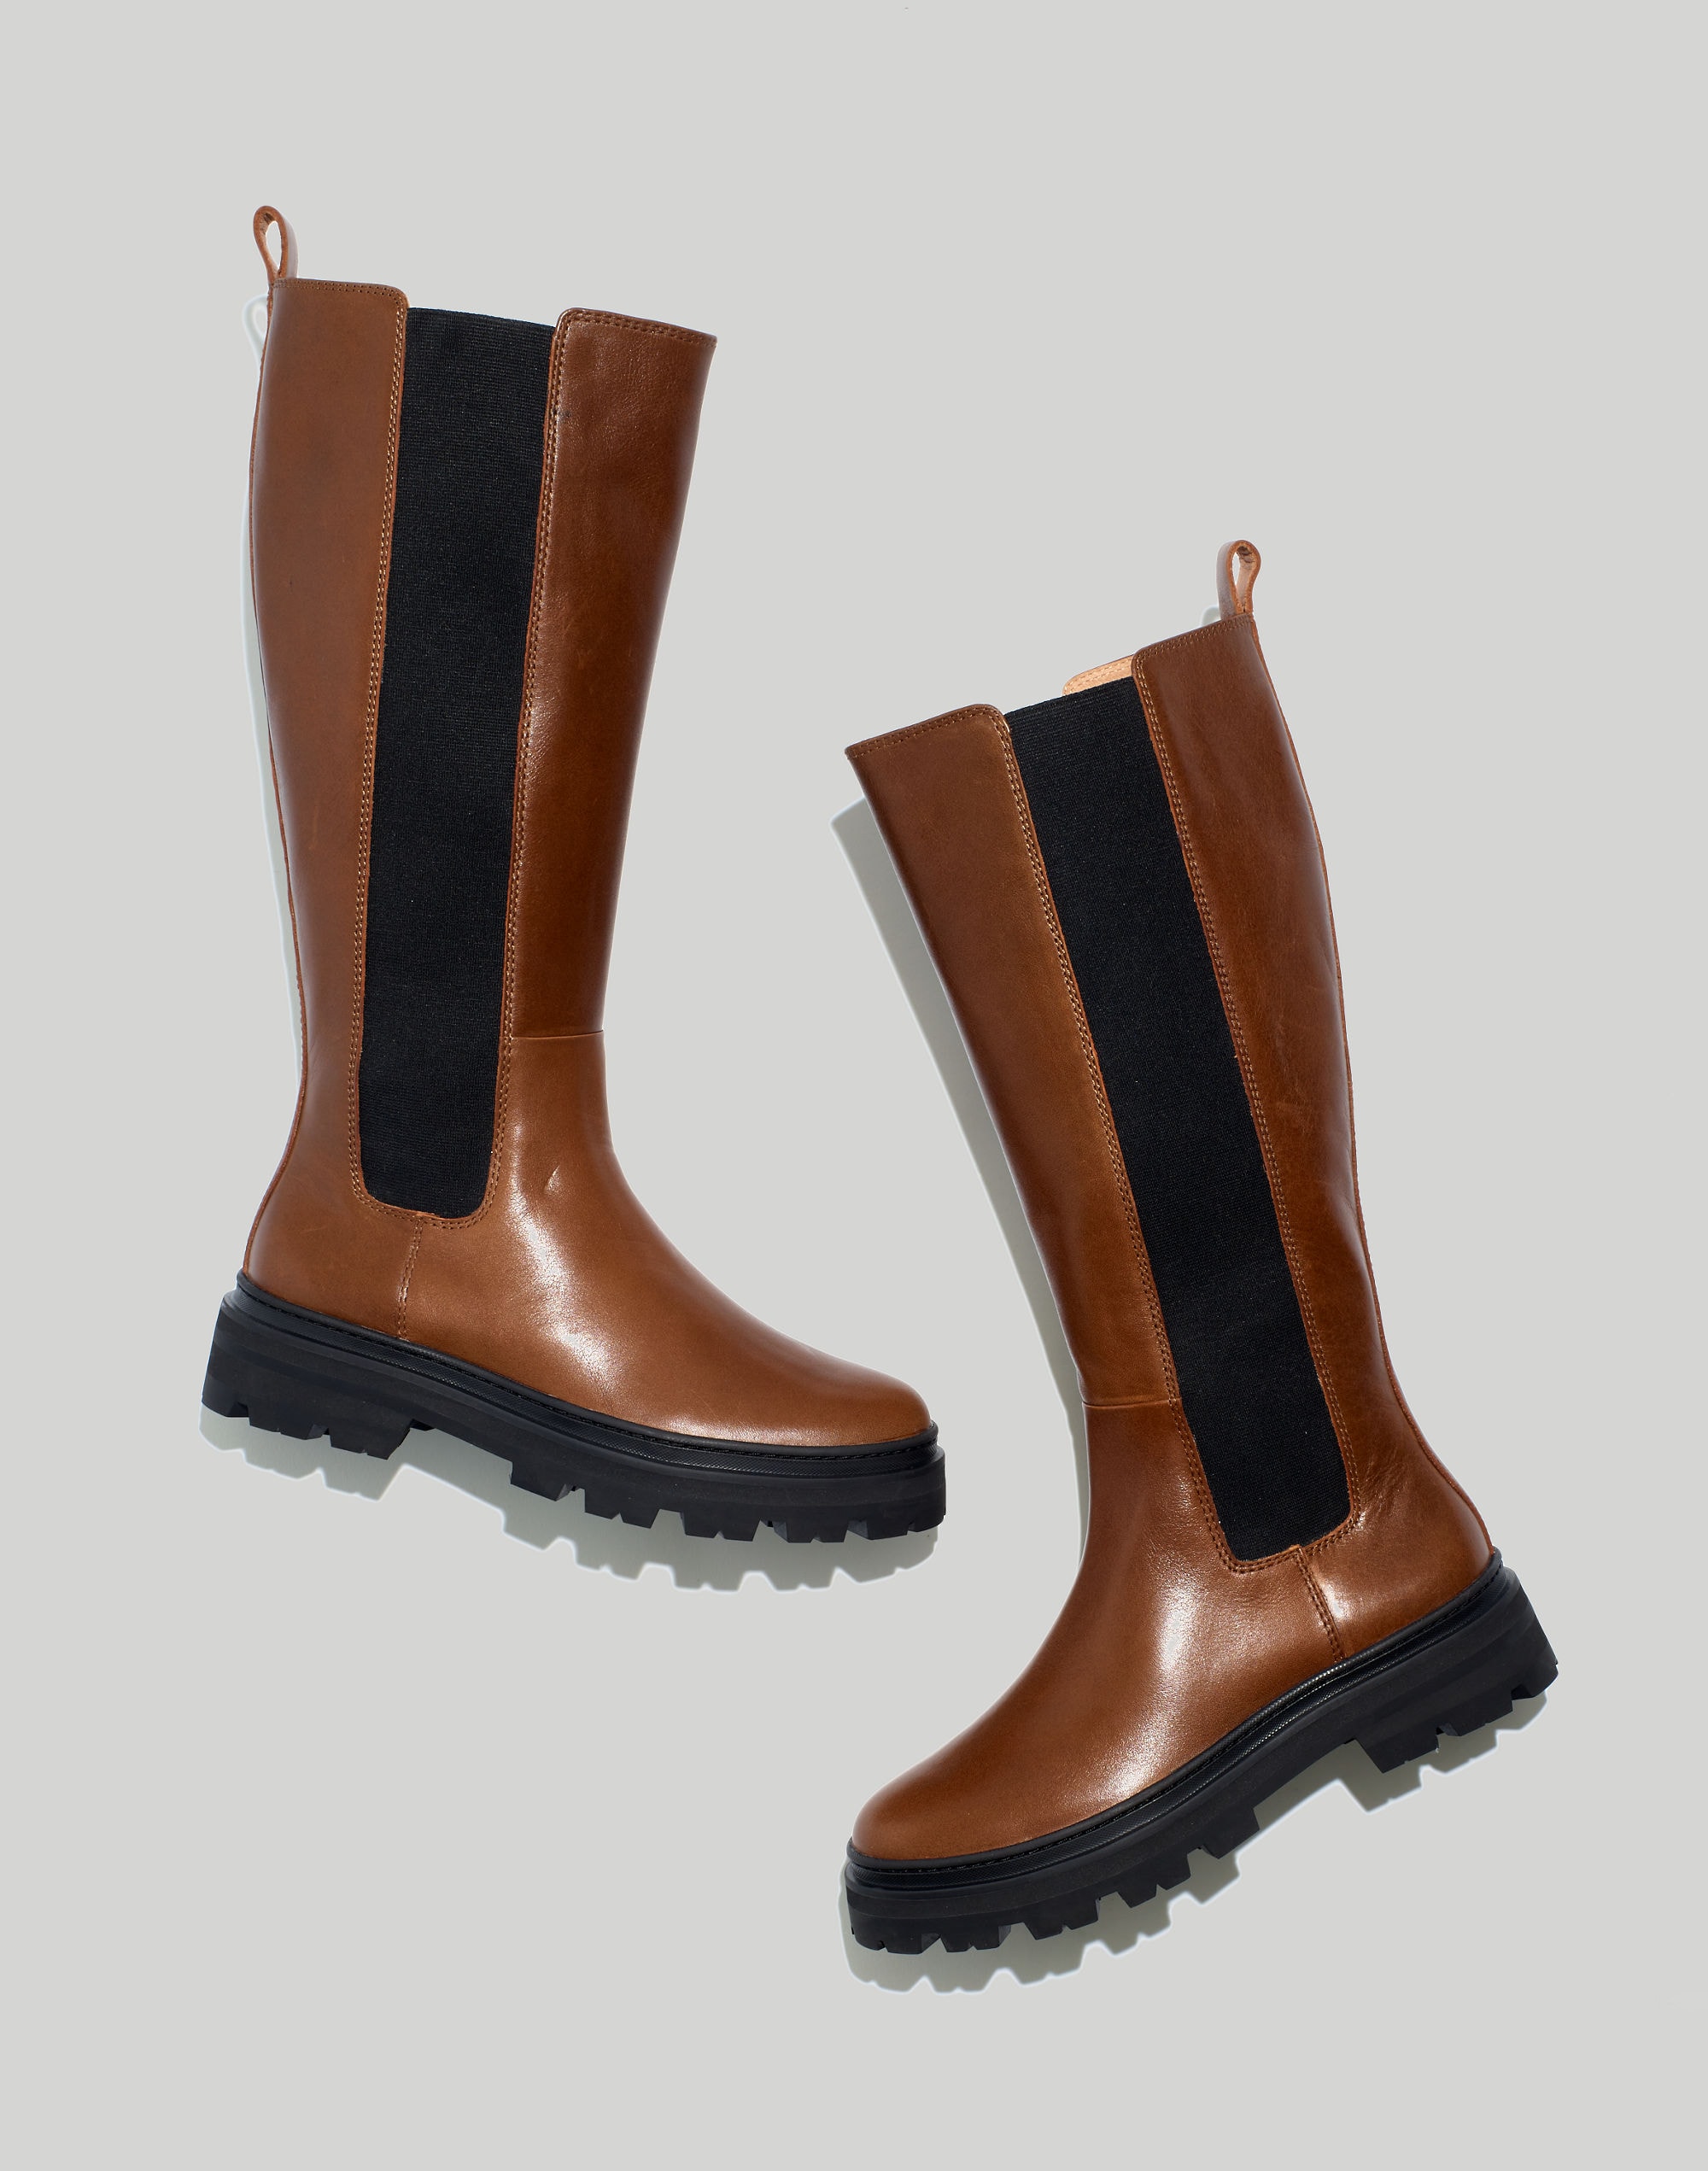 The Poppy Tall Lugsole Boot